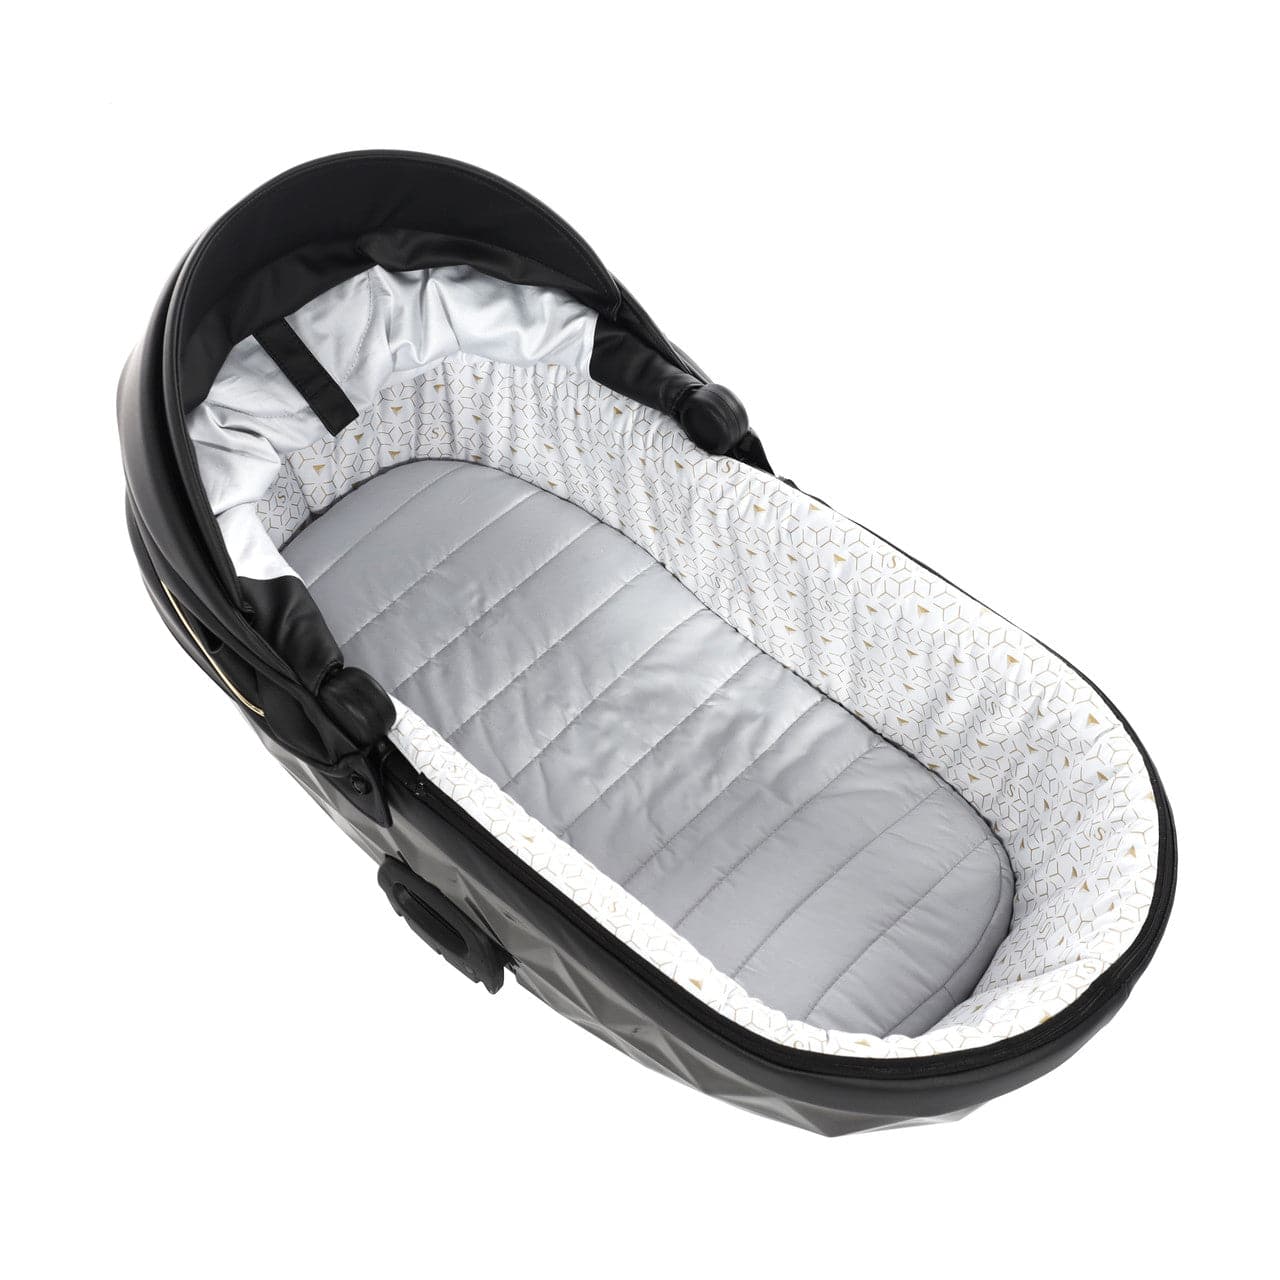 Junama S-Class 2 In 1 Pram - Black - For Your Little One